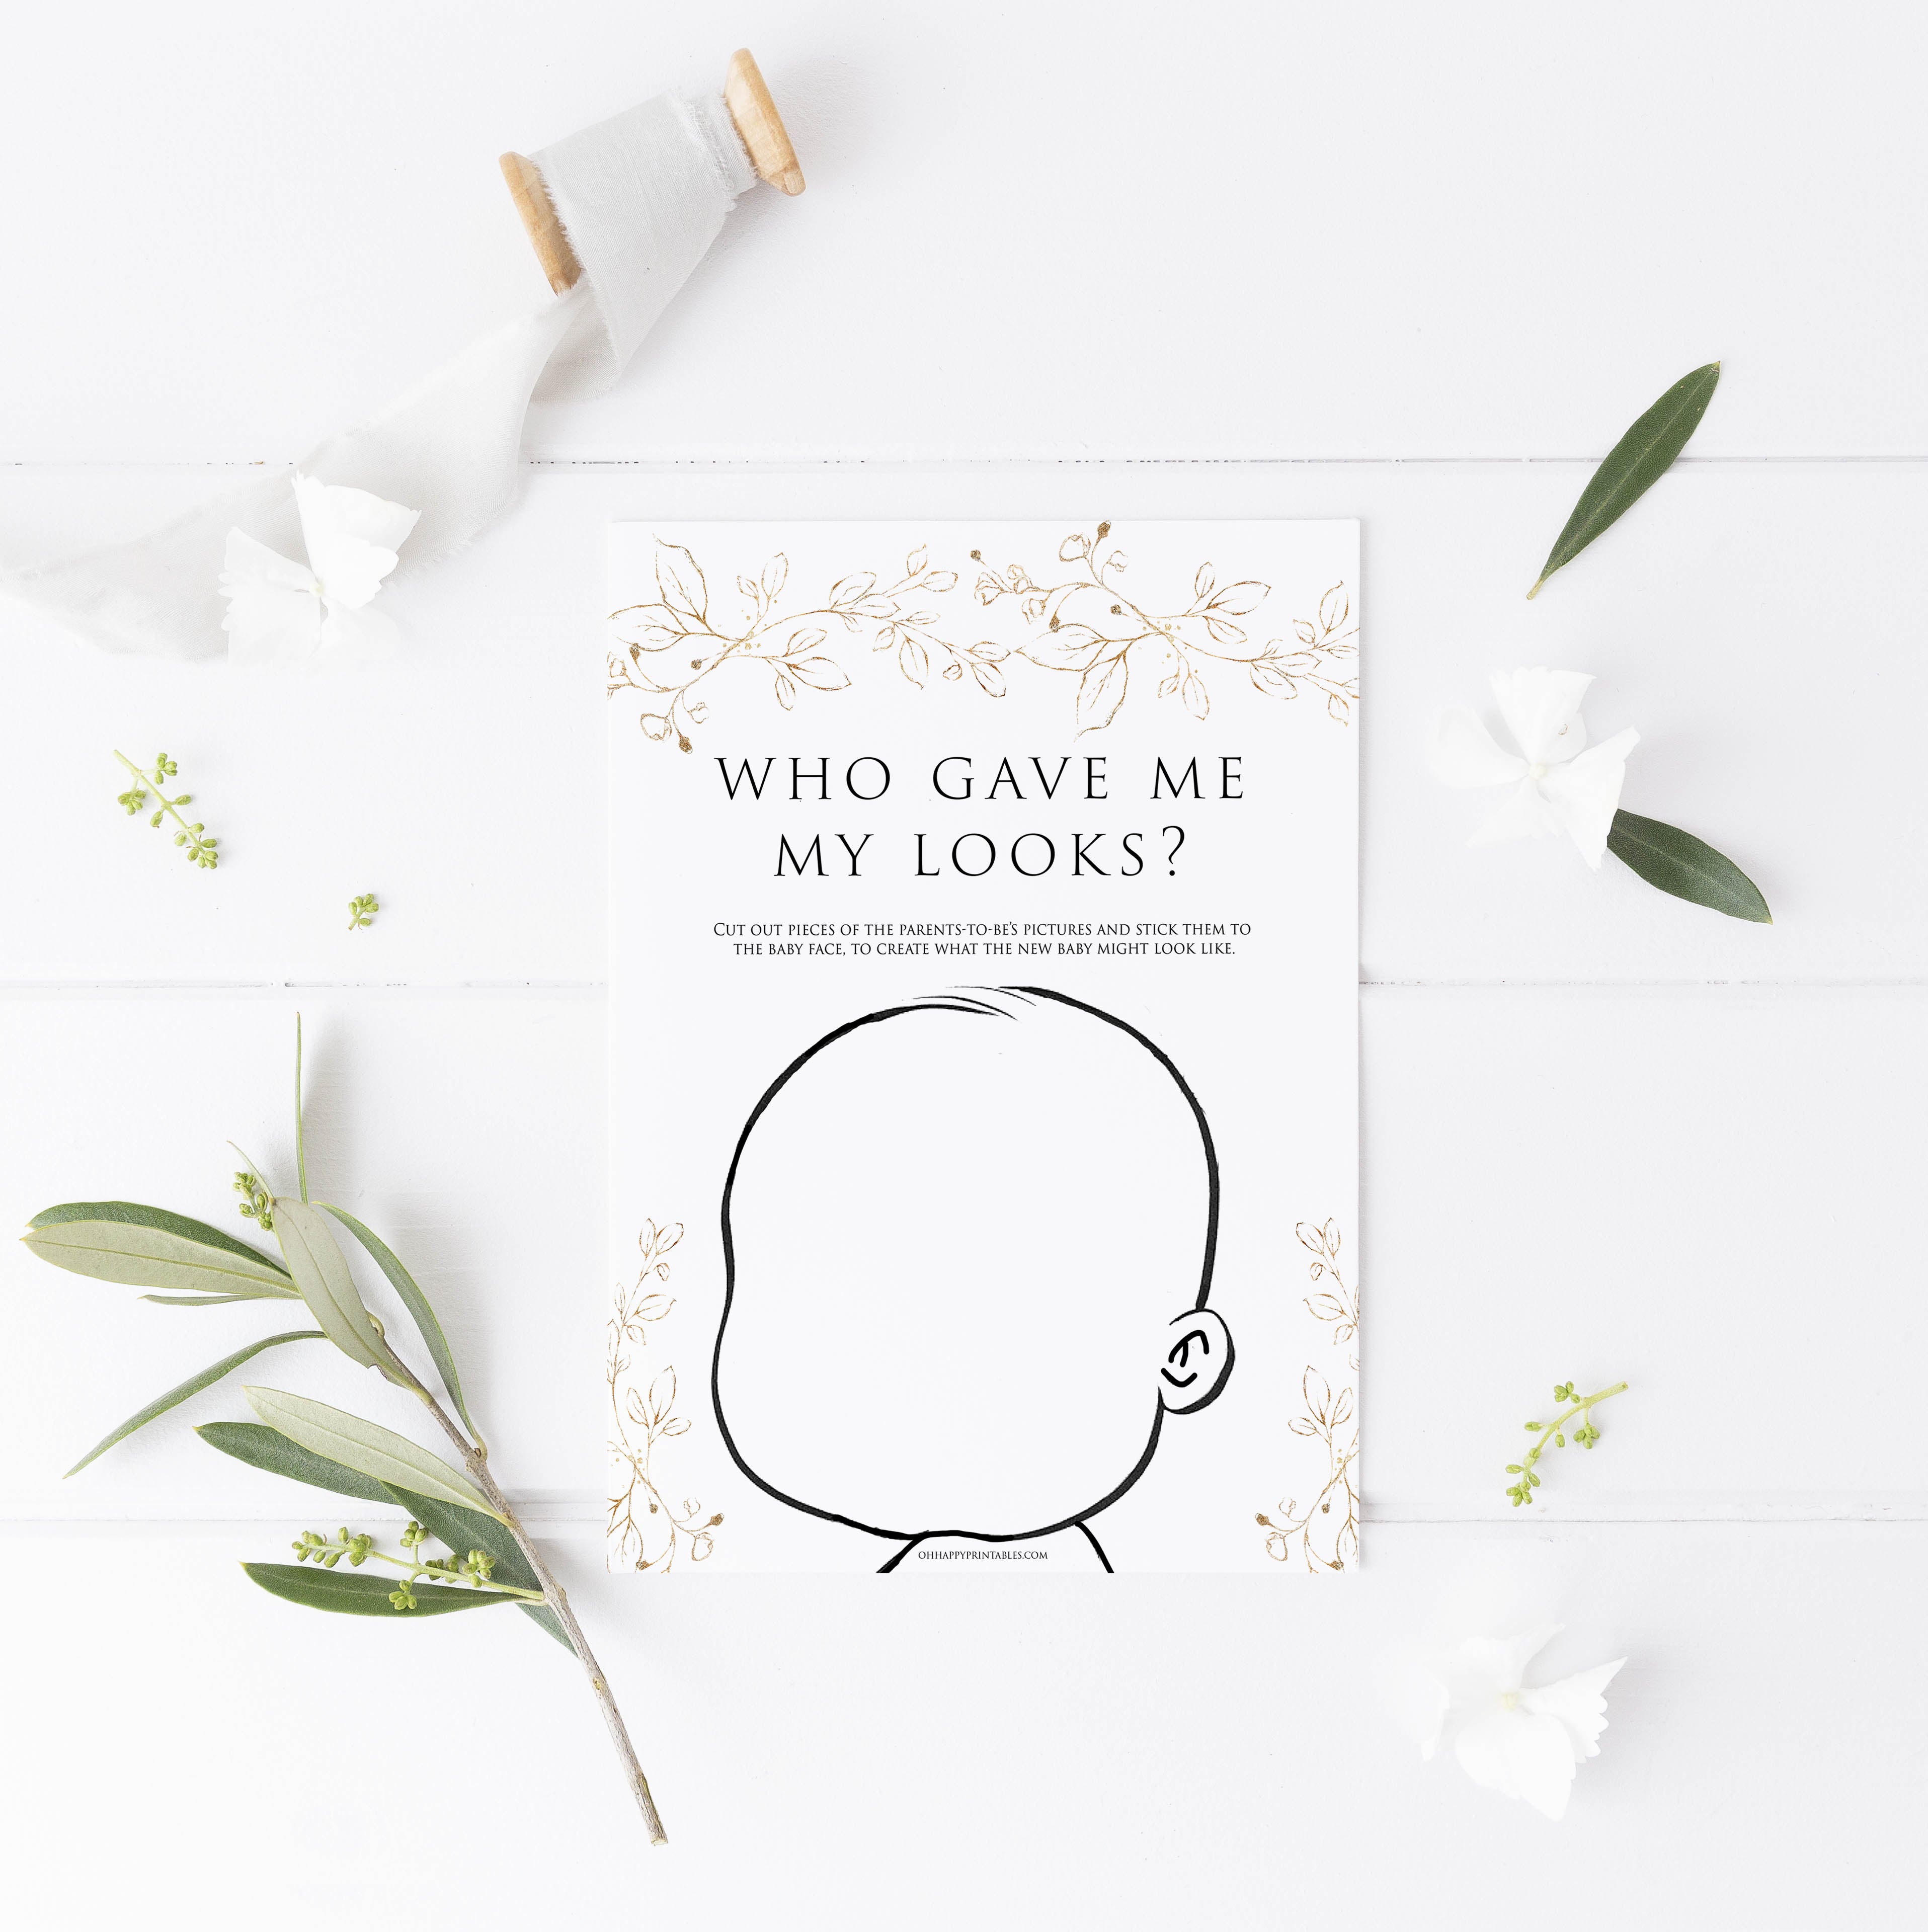 who gave me my looks baby game, Printable baby shower games, gold leaf baby games, baby shower games, fun baby shower ideas, top baby shower ideas, gold leaf baby shower, baby shower games, fun gold leaf baby shower ideas